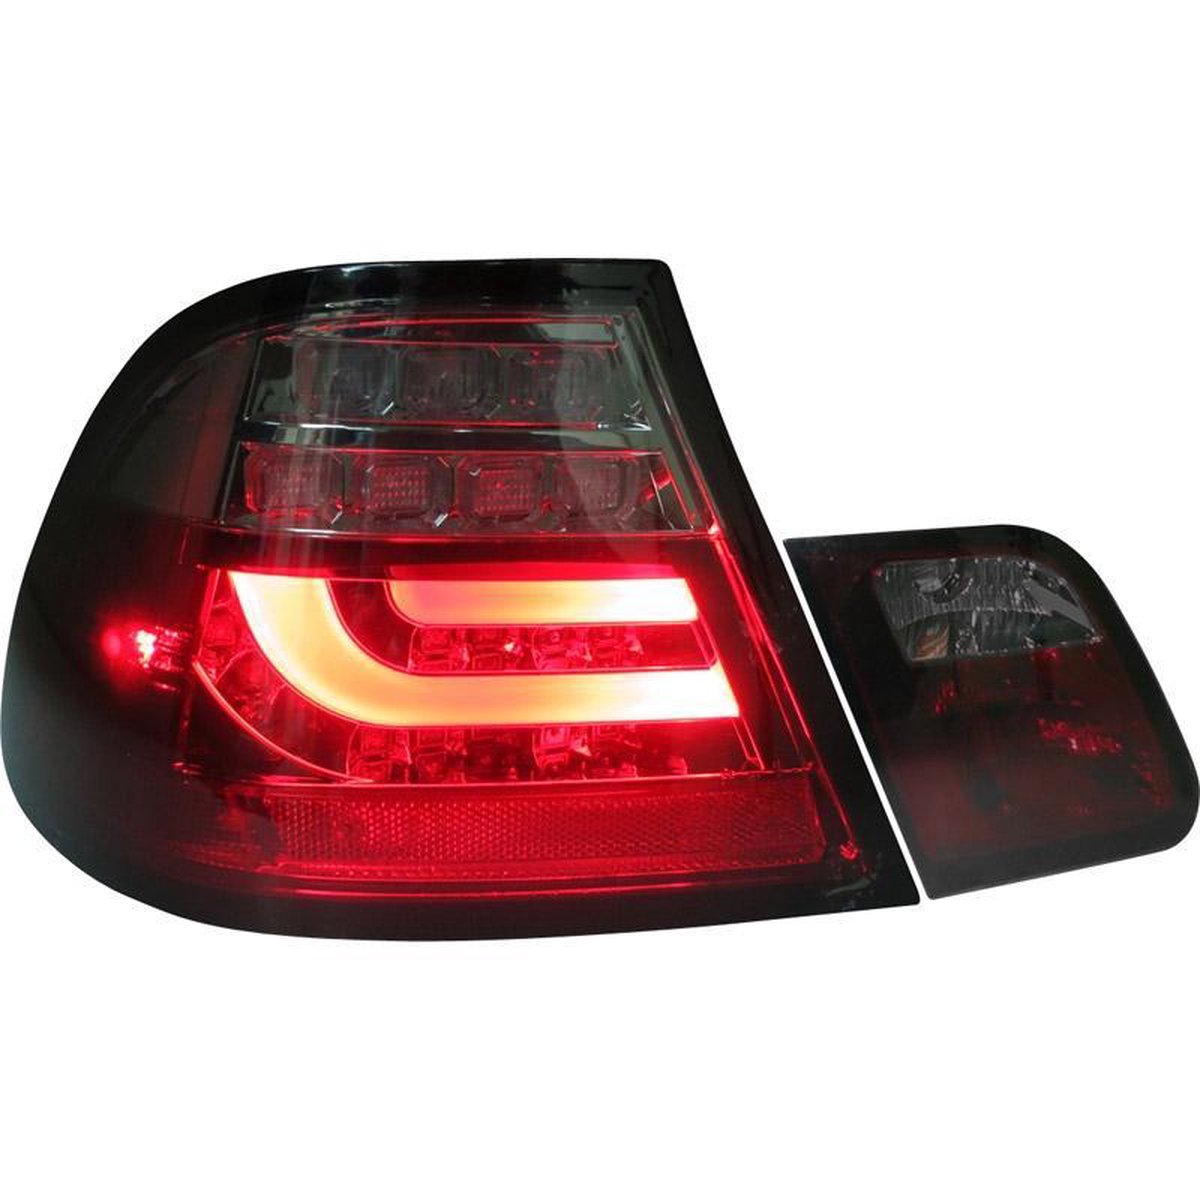 AutoStyle Set LED Achterlichten passend voor BMW 3-Serie E46 Coupe  1999-2002 - Rood/Smoke | bol.com